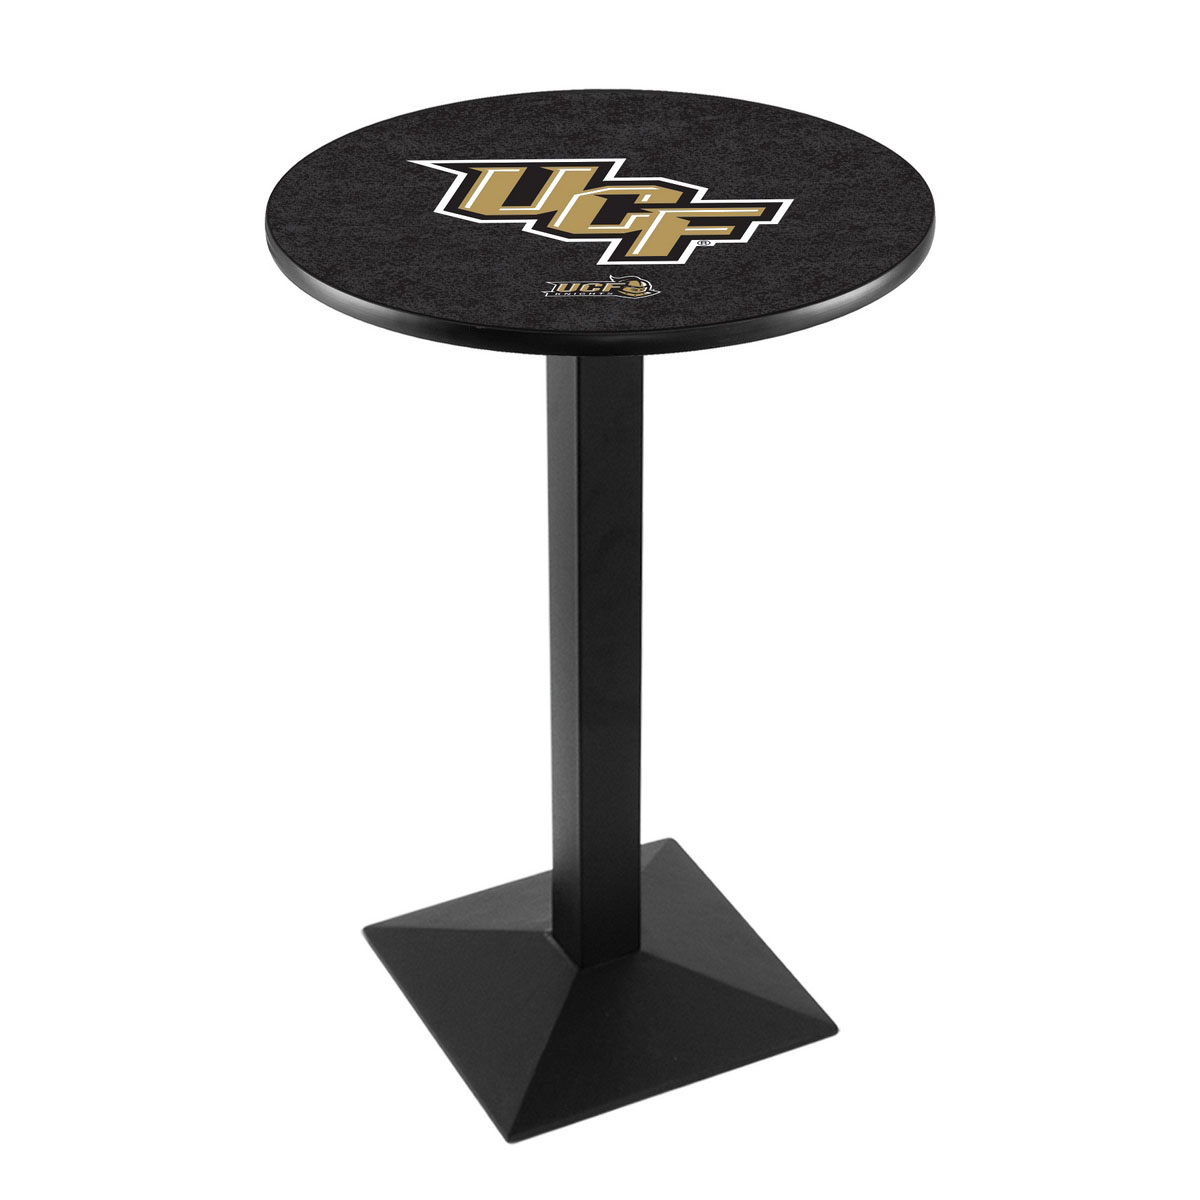 University Of Central Florida Logo Pub Bar Table With Square Stand